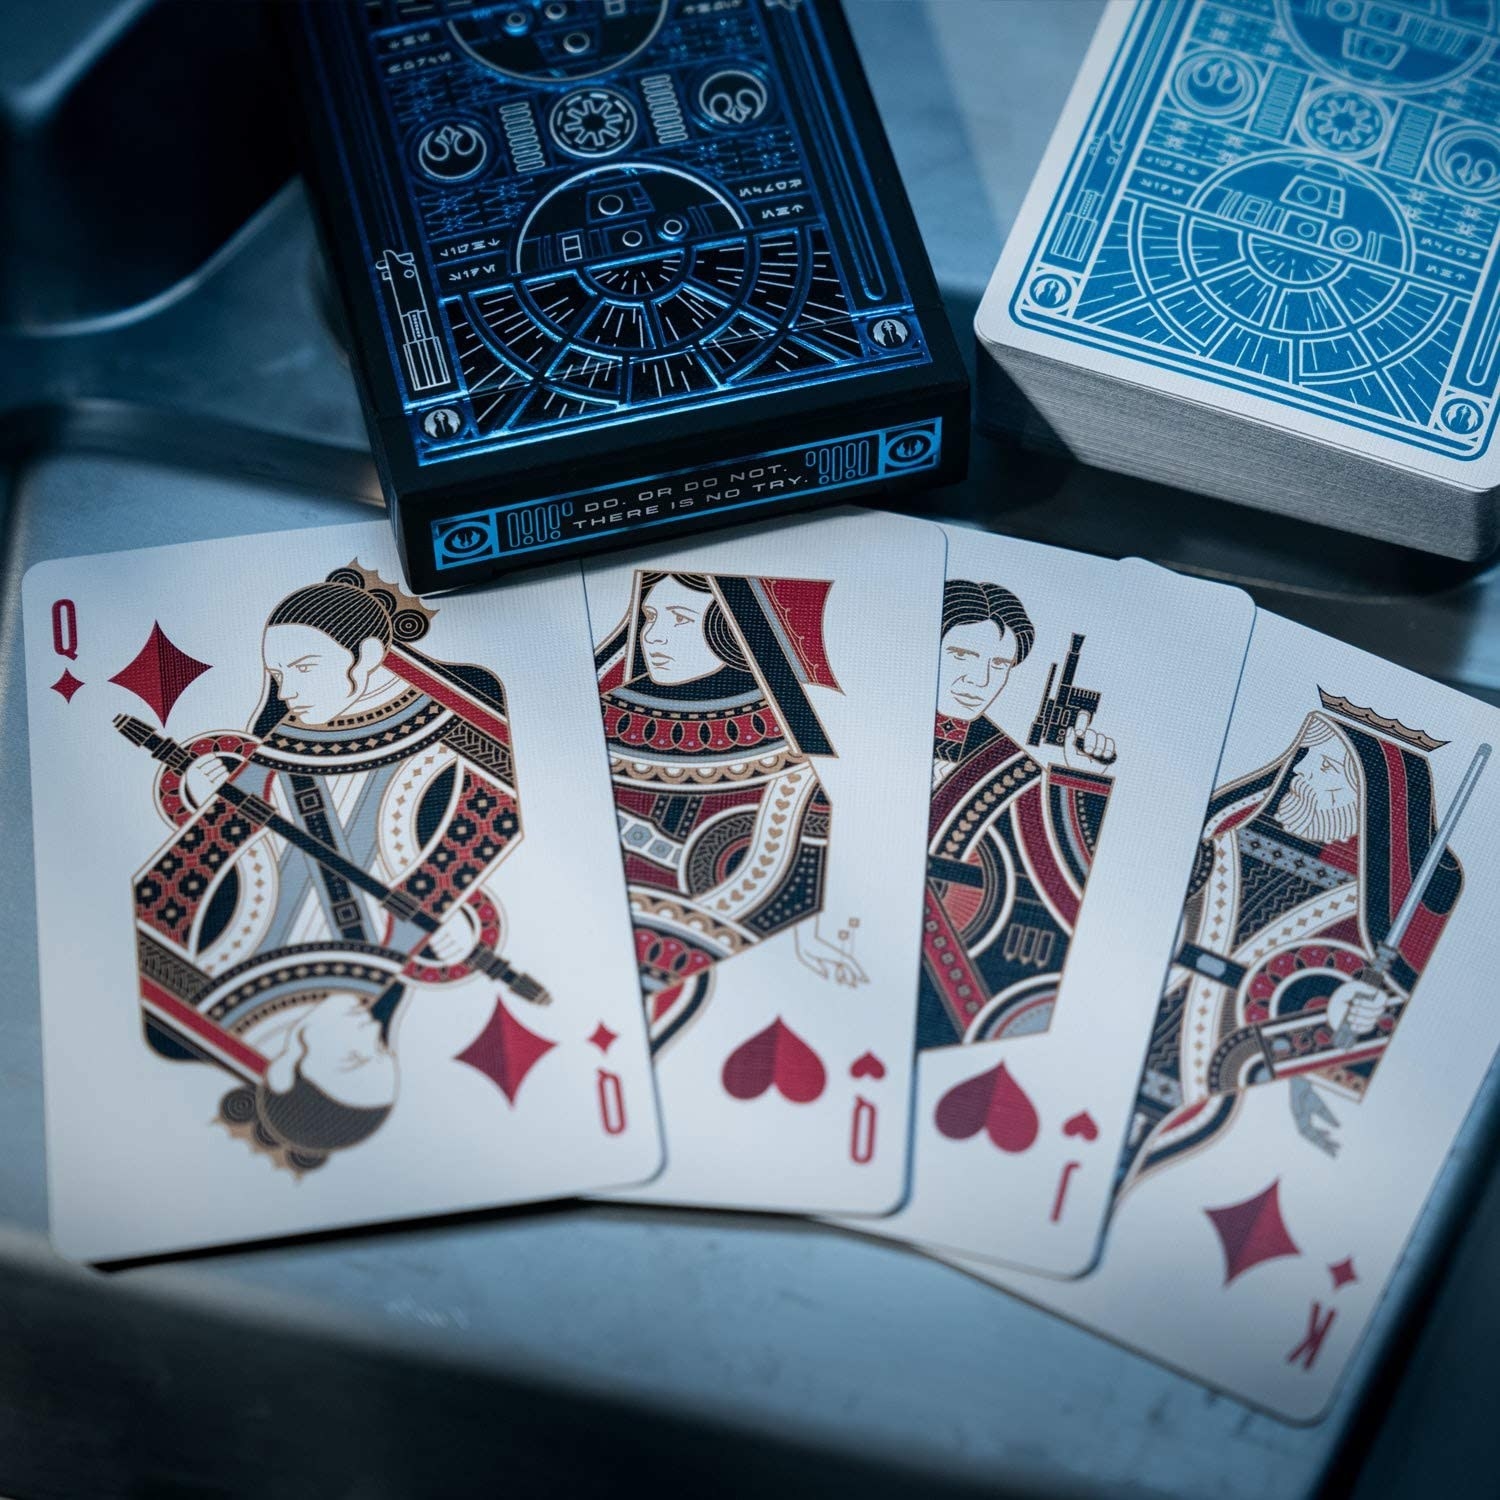 The cards laid out on a table